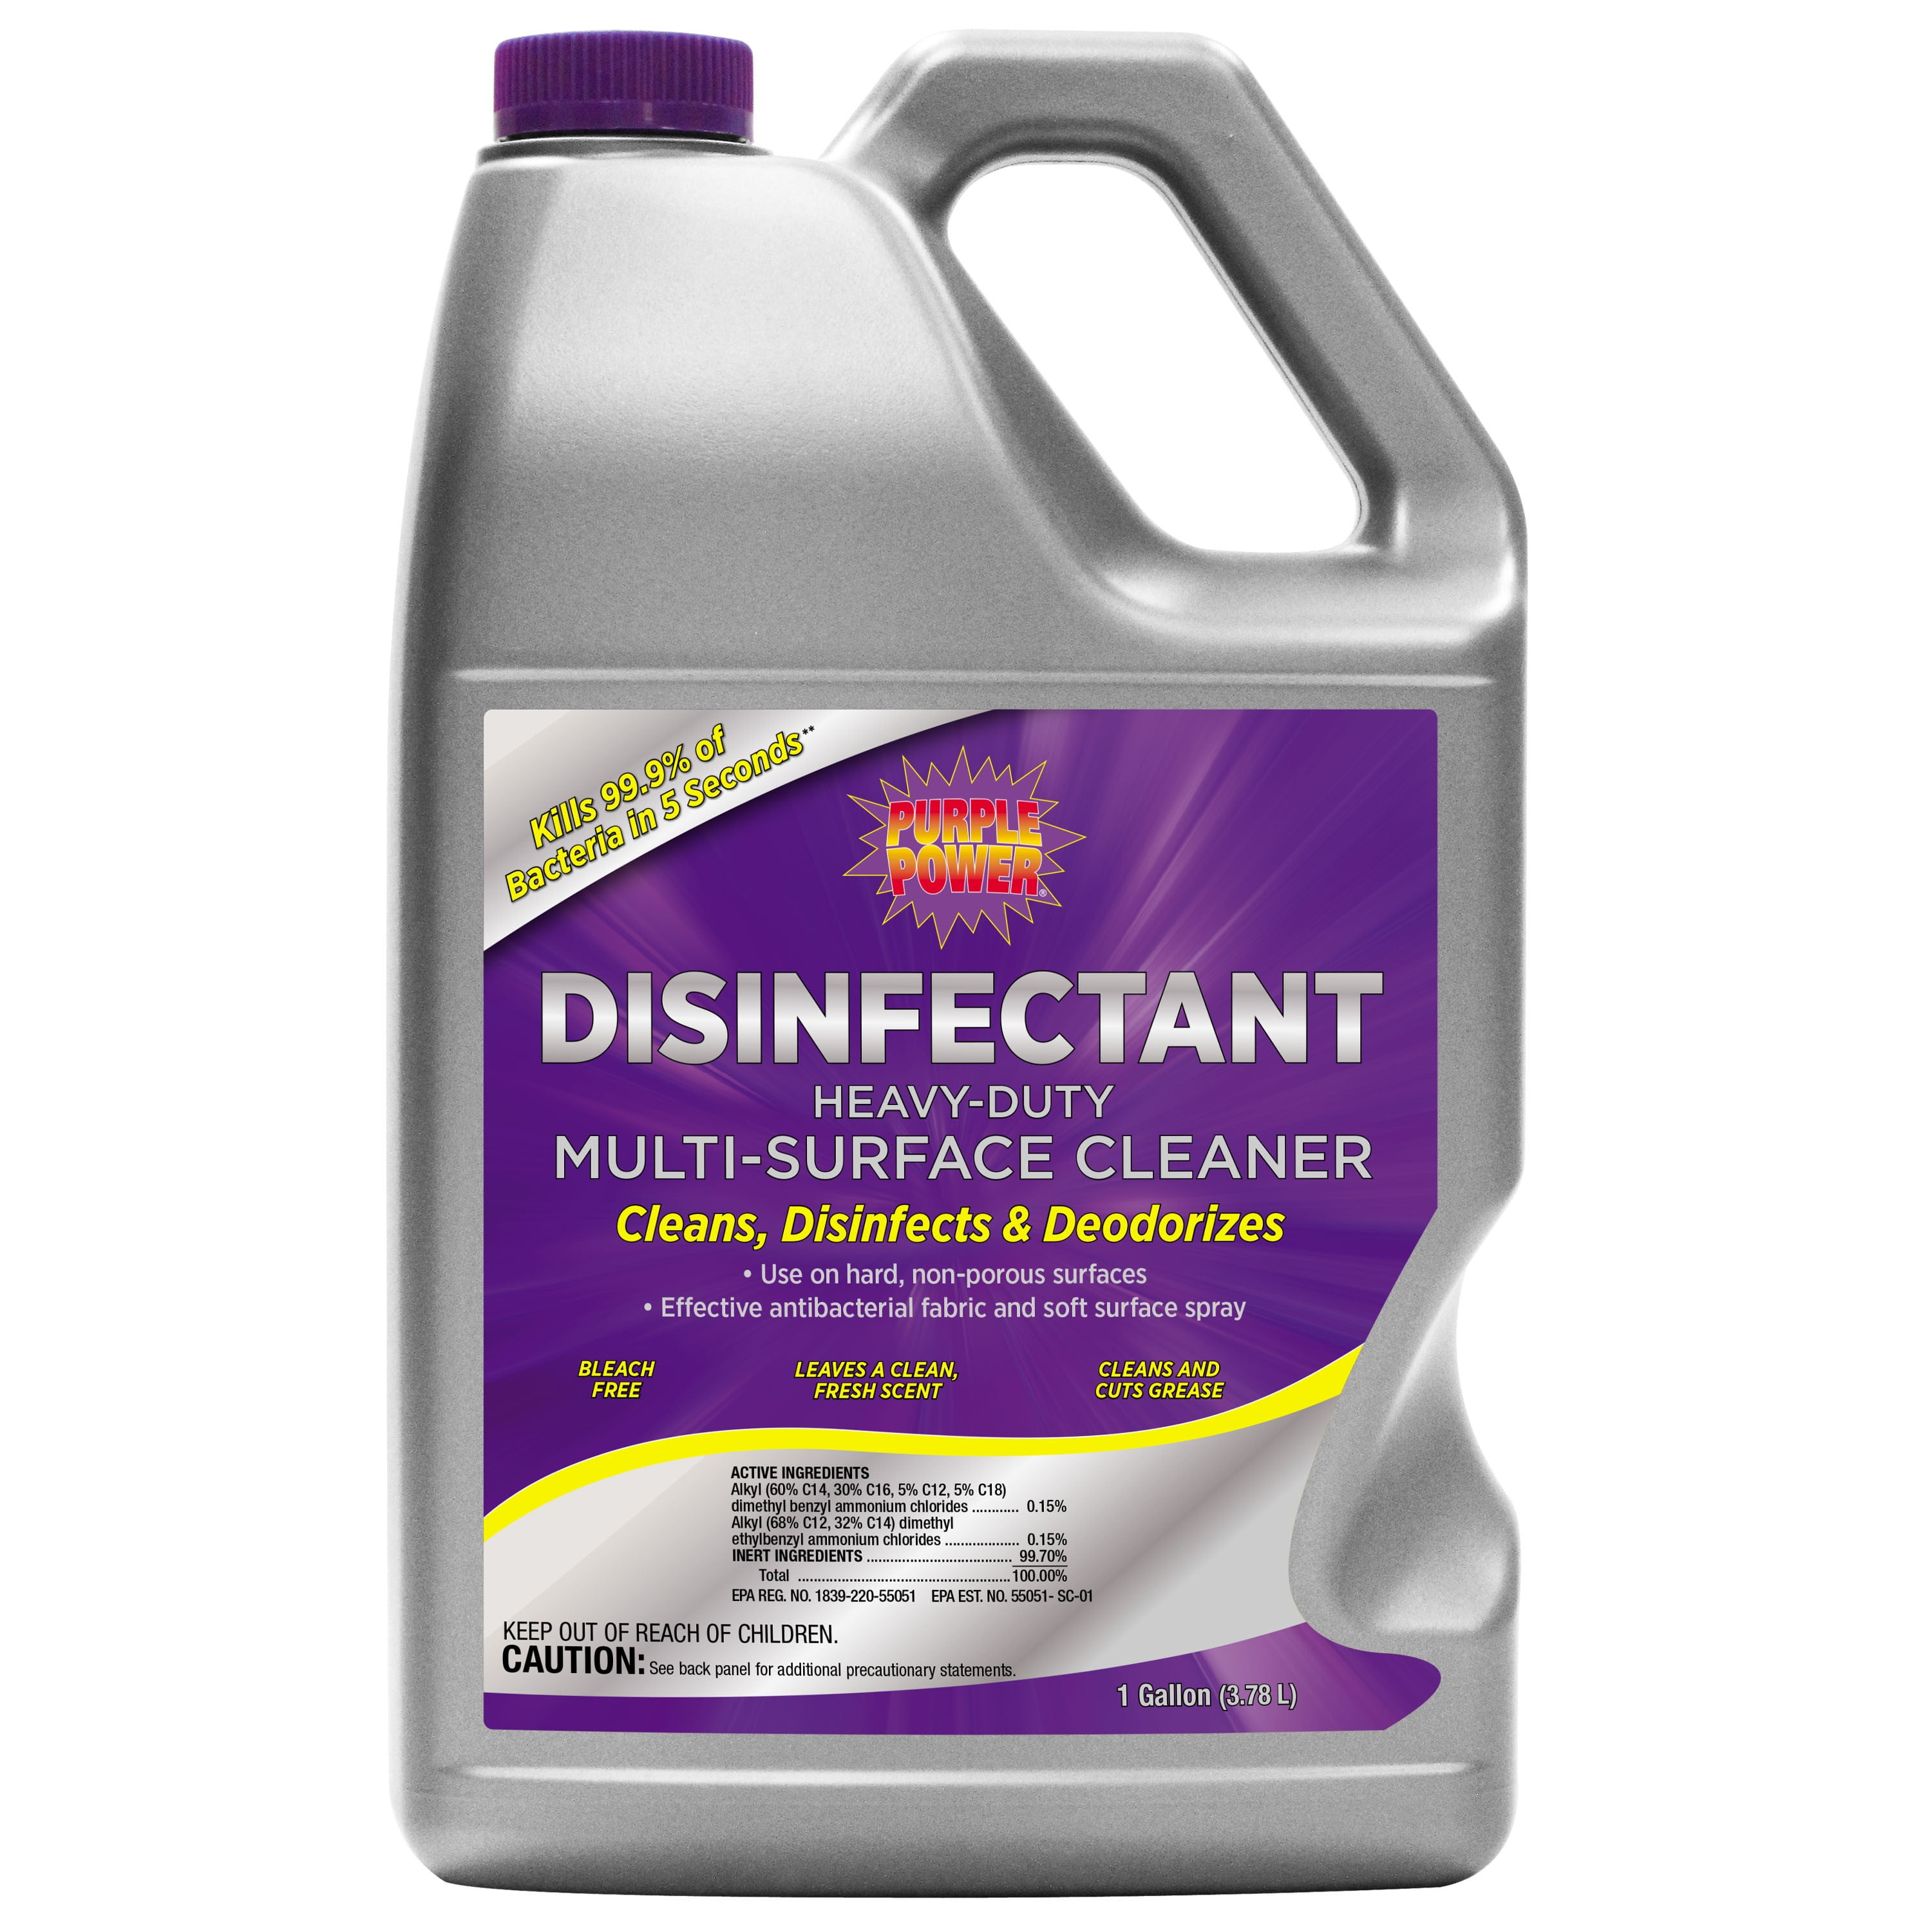 I scrubbed my hearth with purple power degreaser (and other